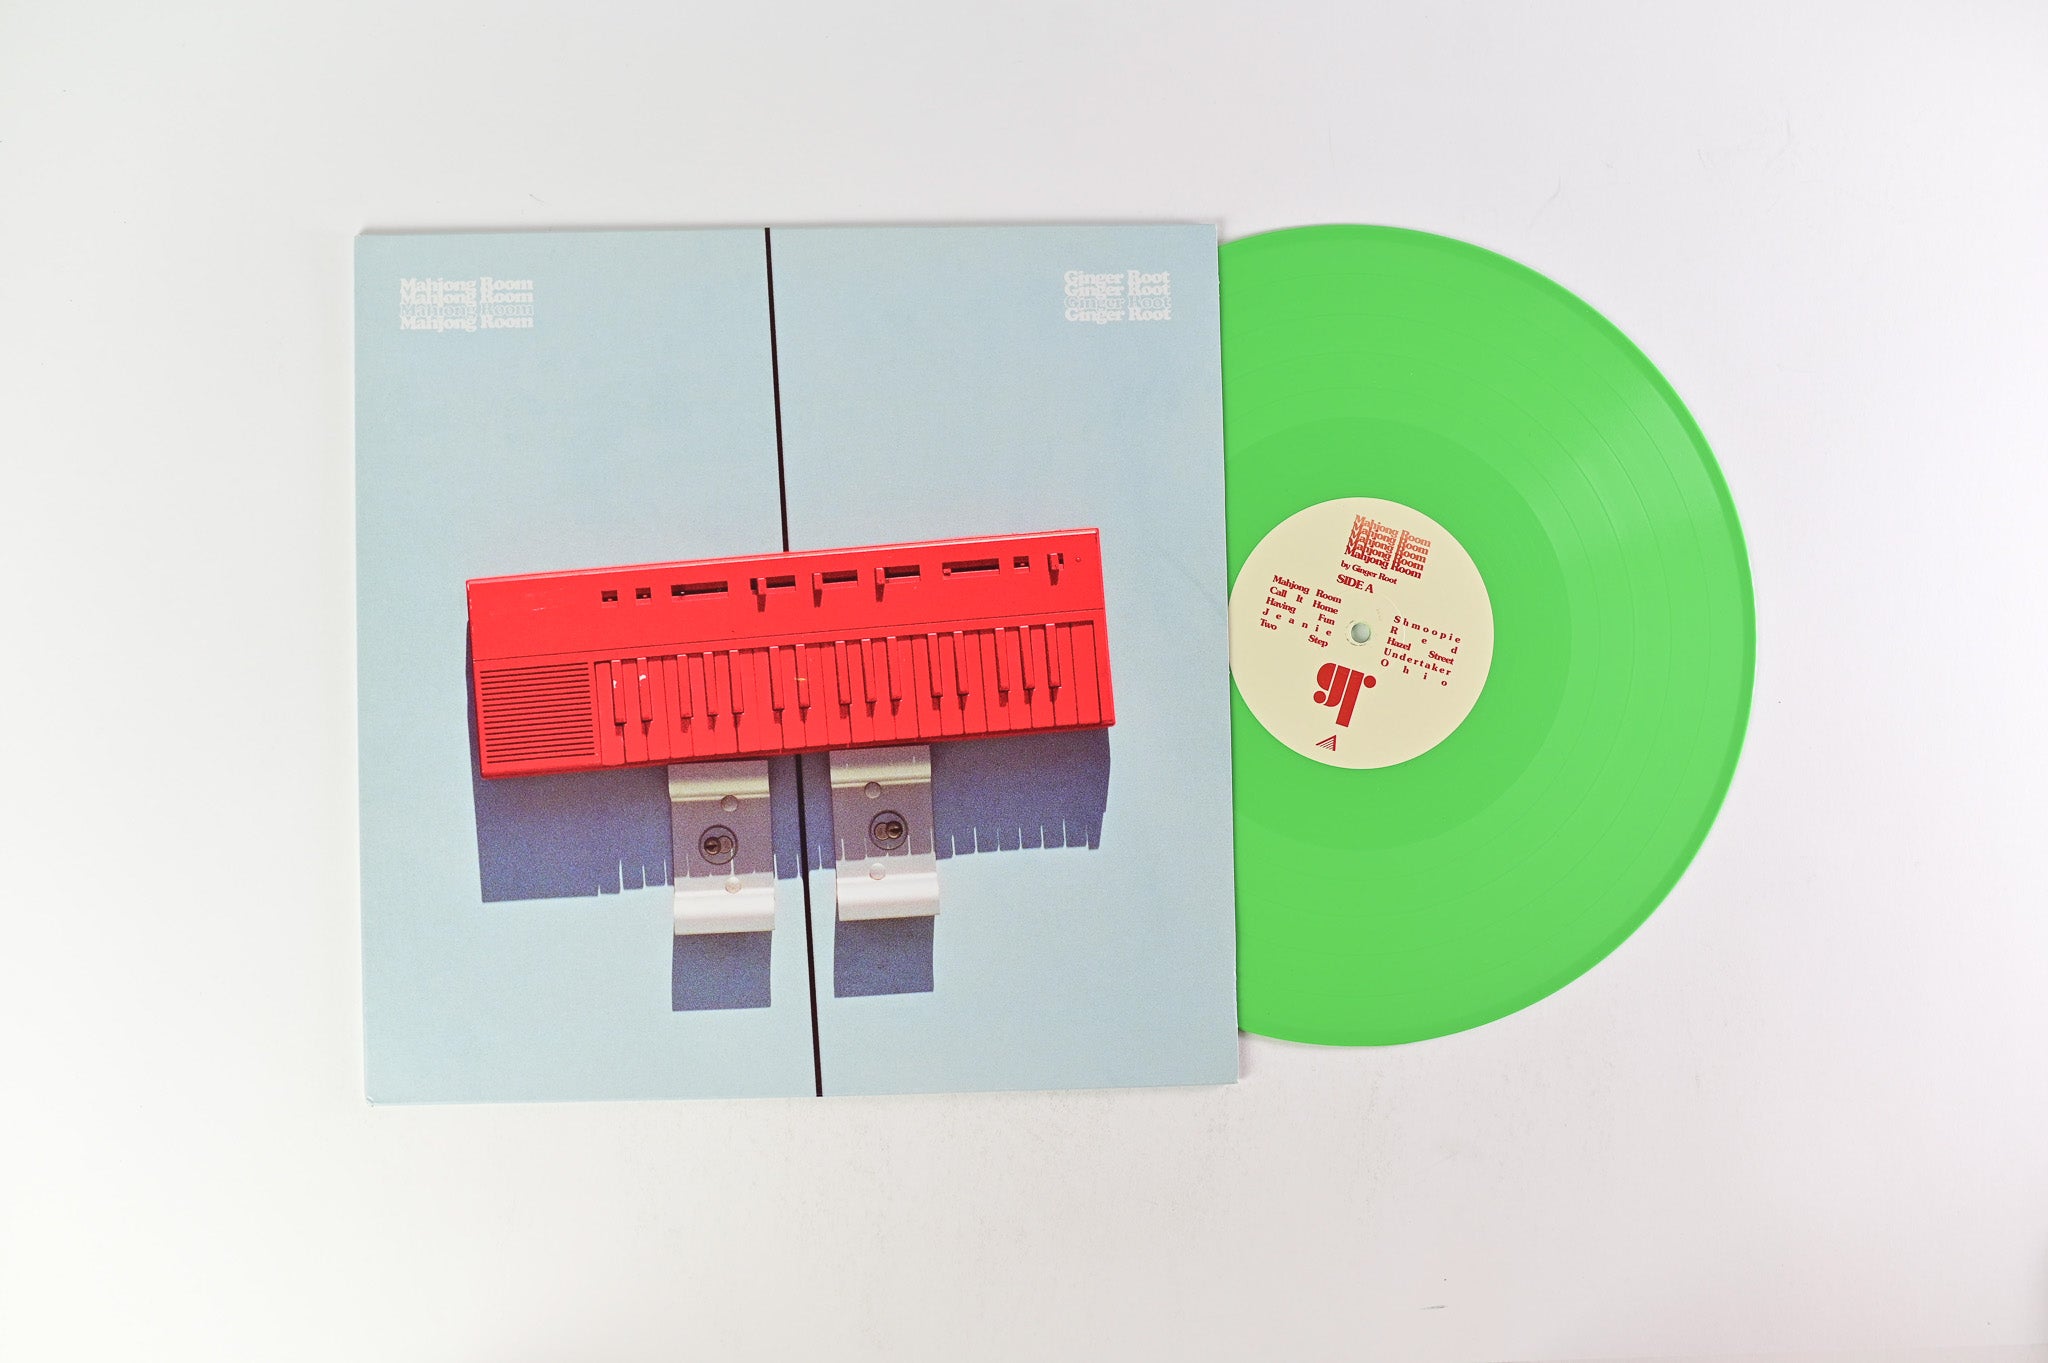 Ginger Root - Mahjong Room on Acrophase Records Green Vinyl